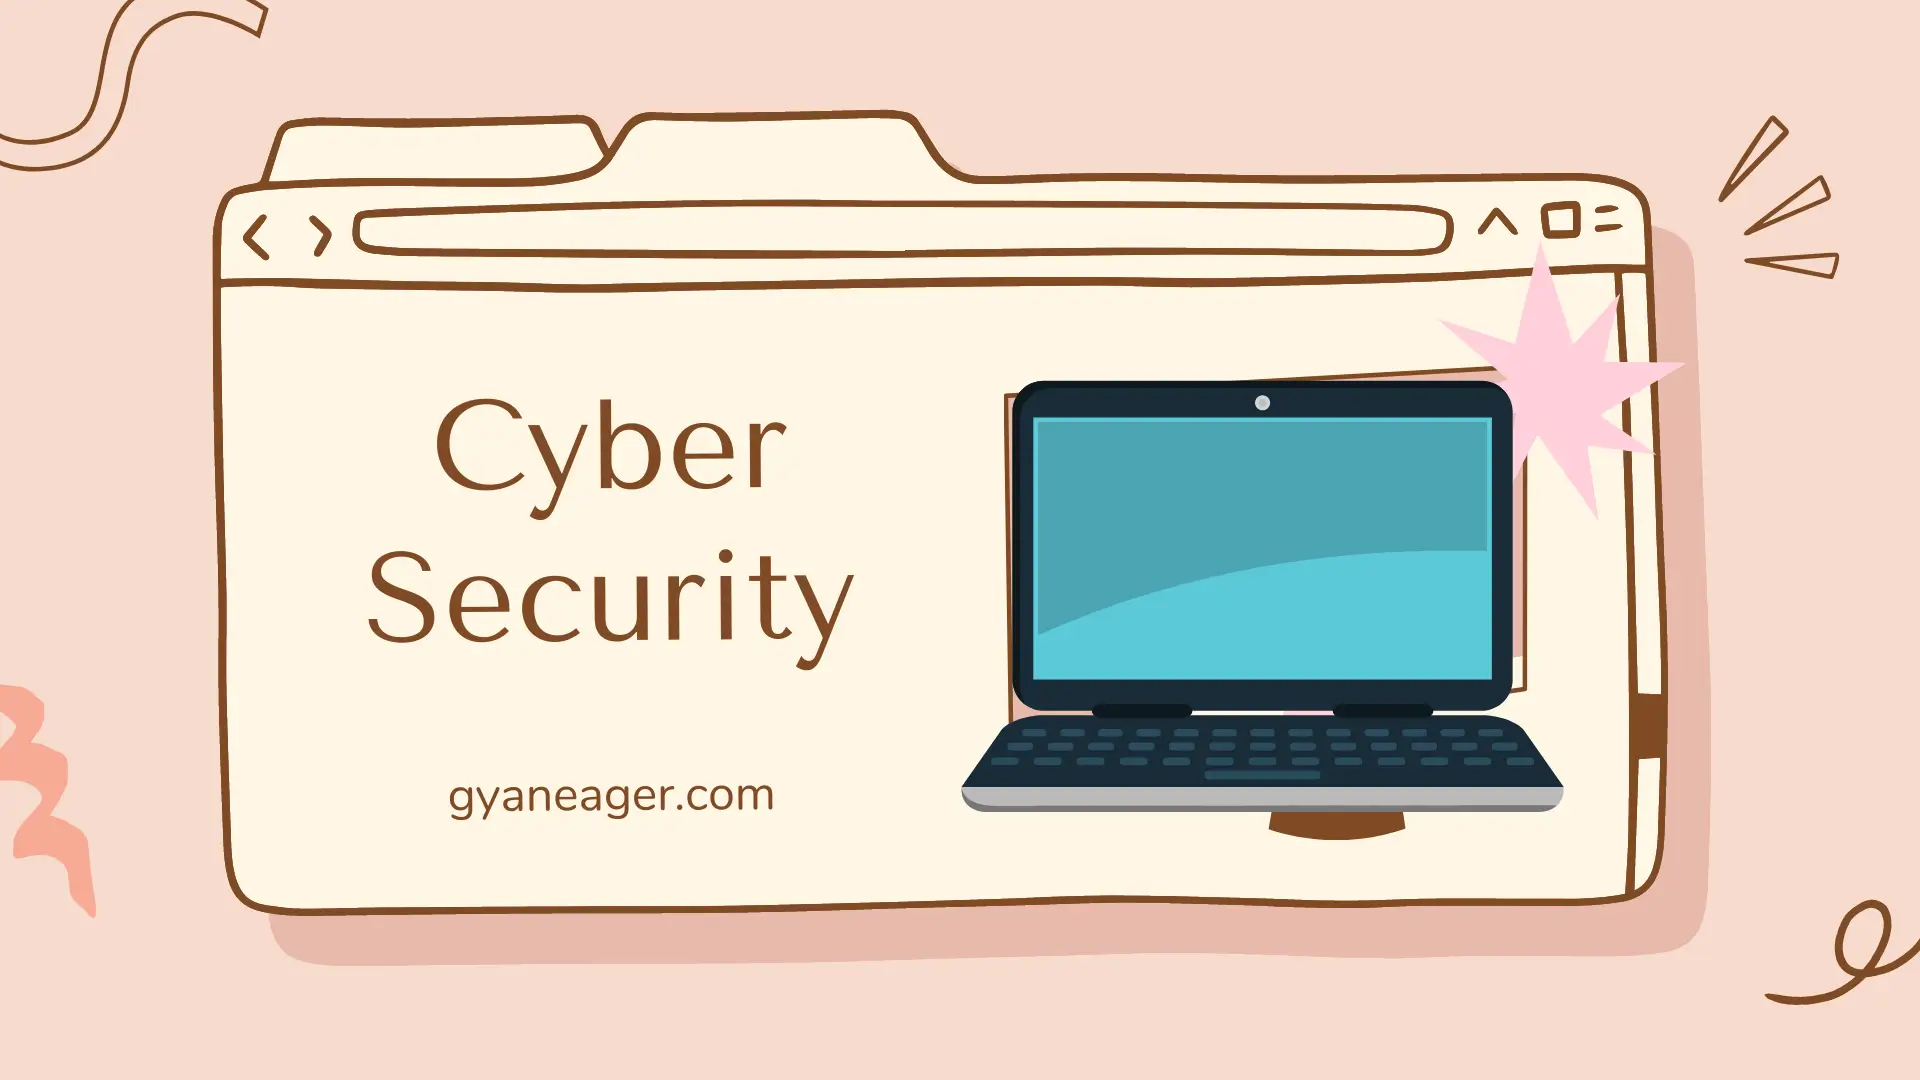 All about Cyber Security